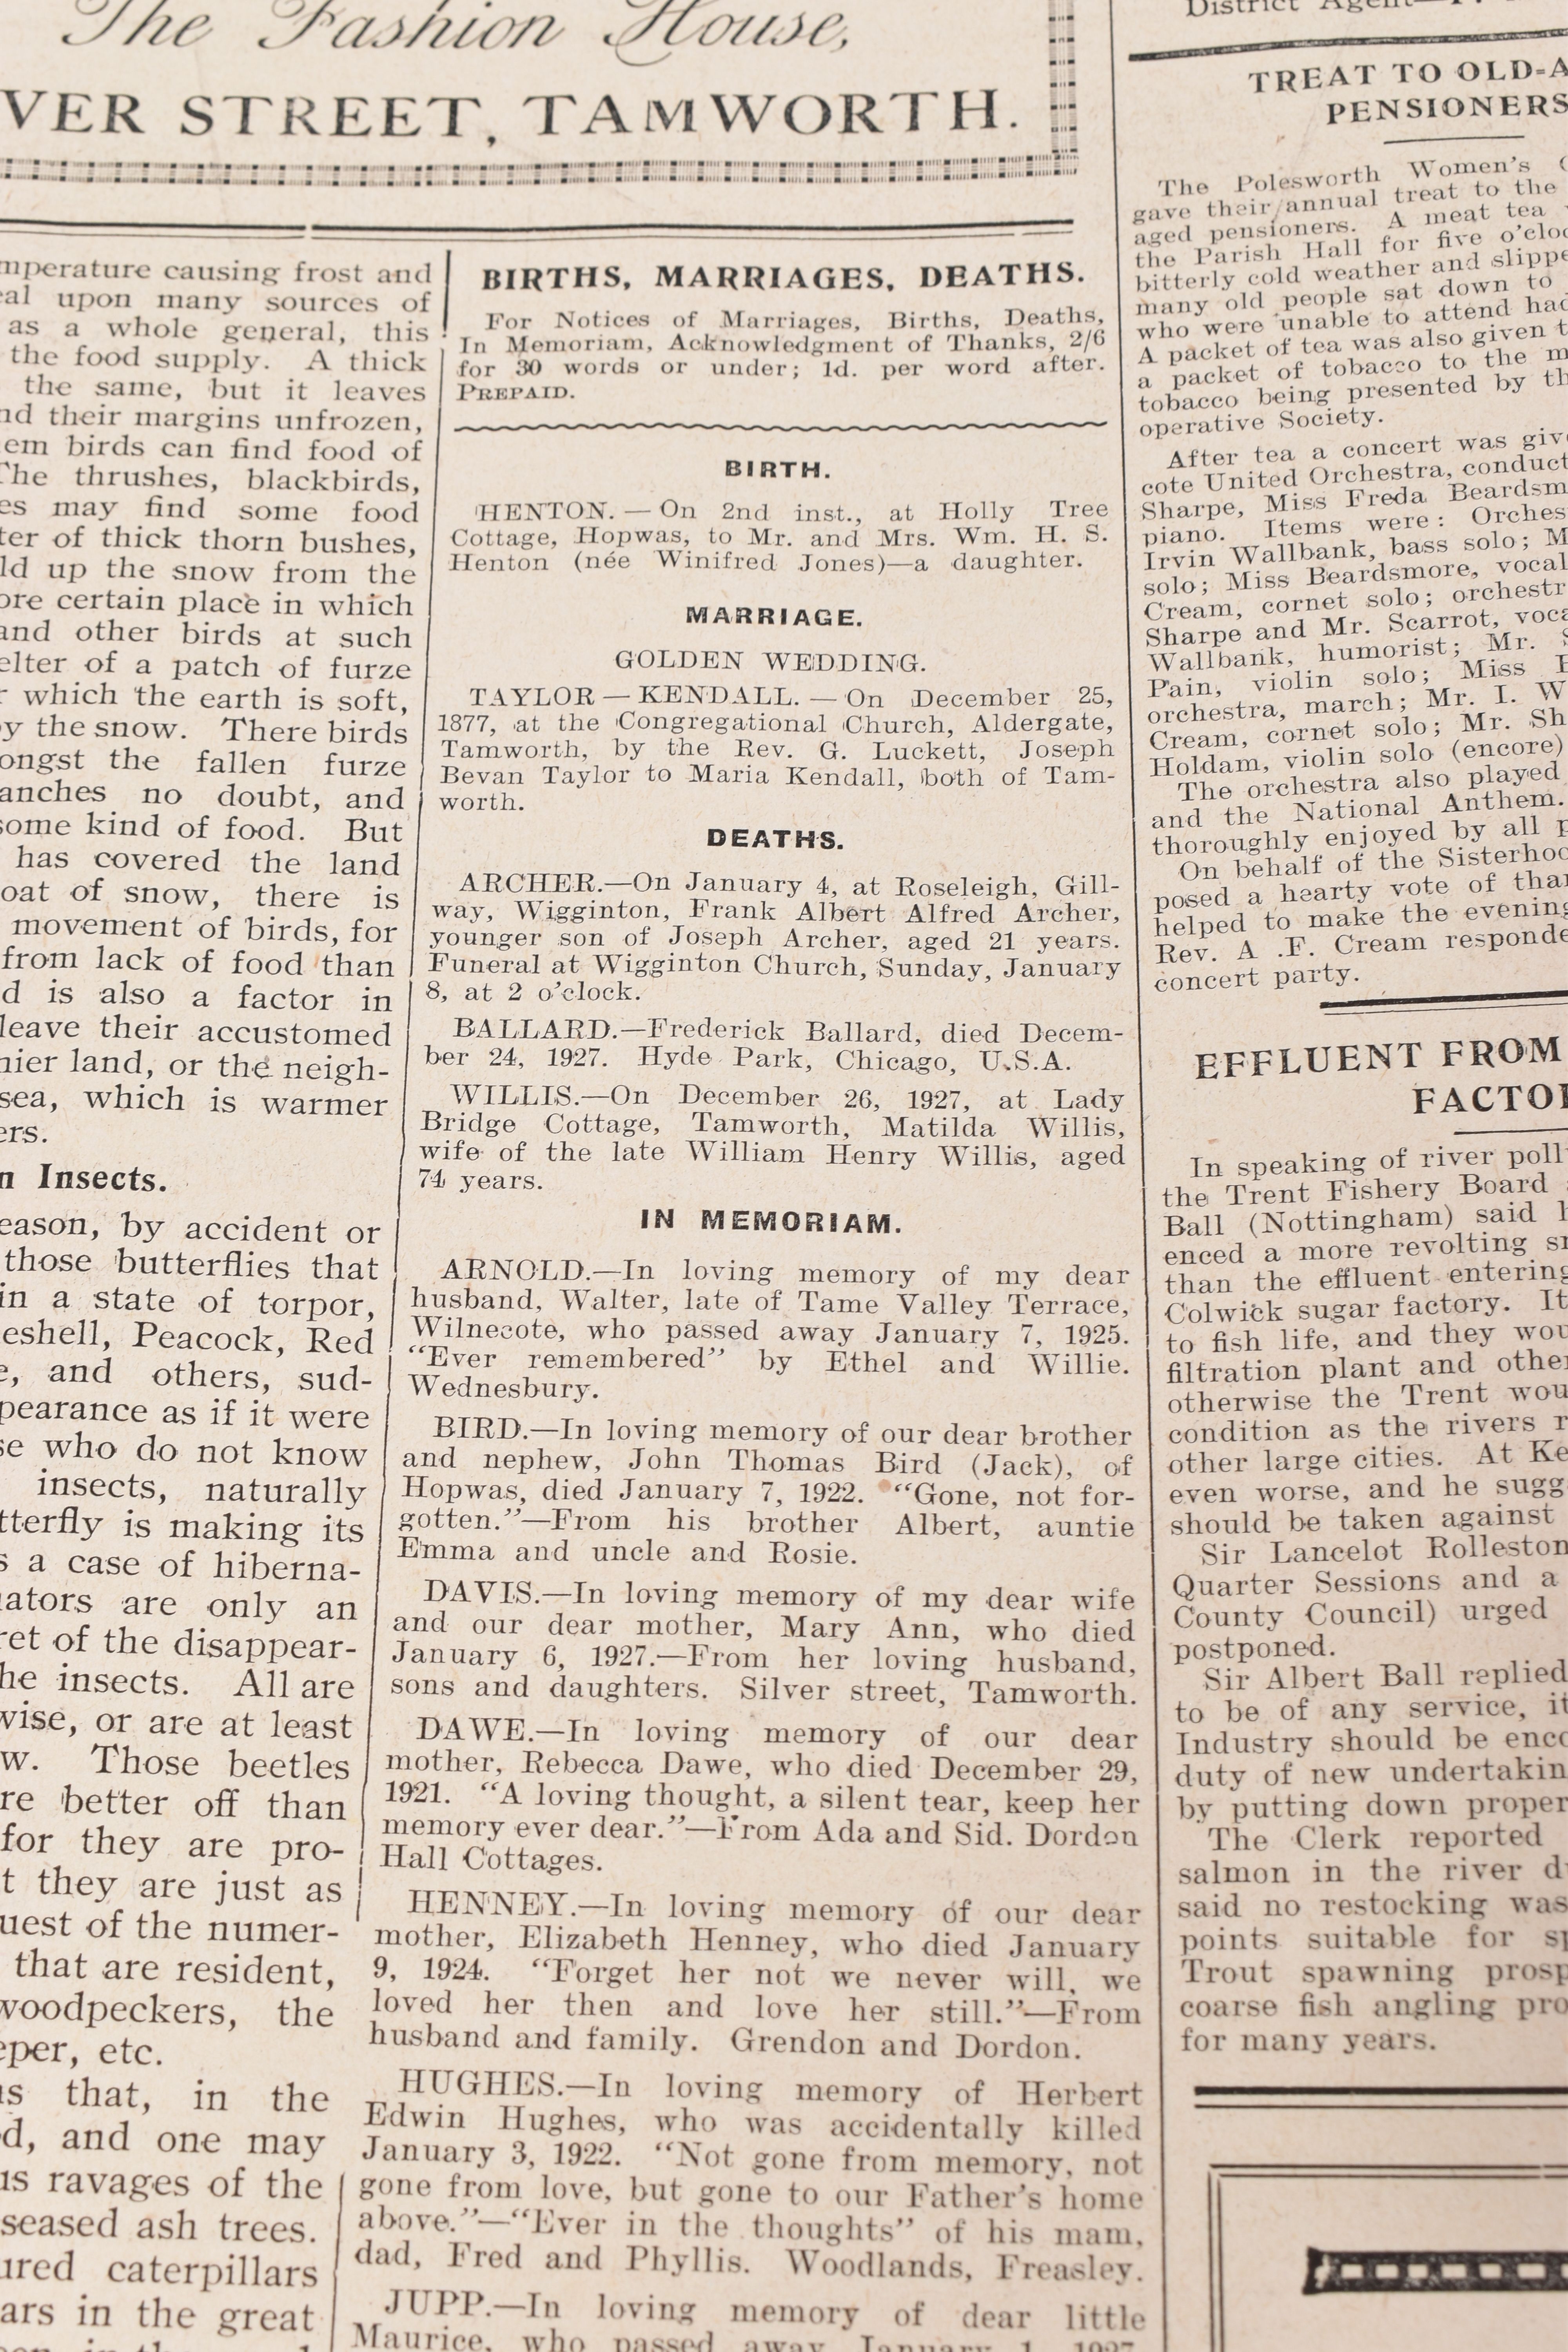 THE TAMWORTH HERALD, an Archive of the Tamworth Herald Newspaper from 1928, the newspapers are bound - Image 4 of 11